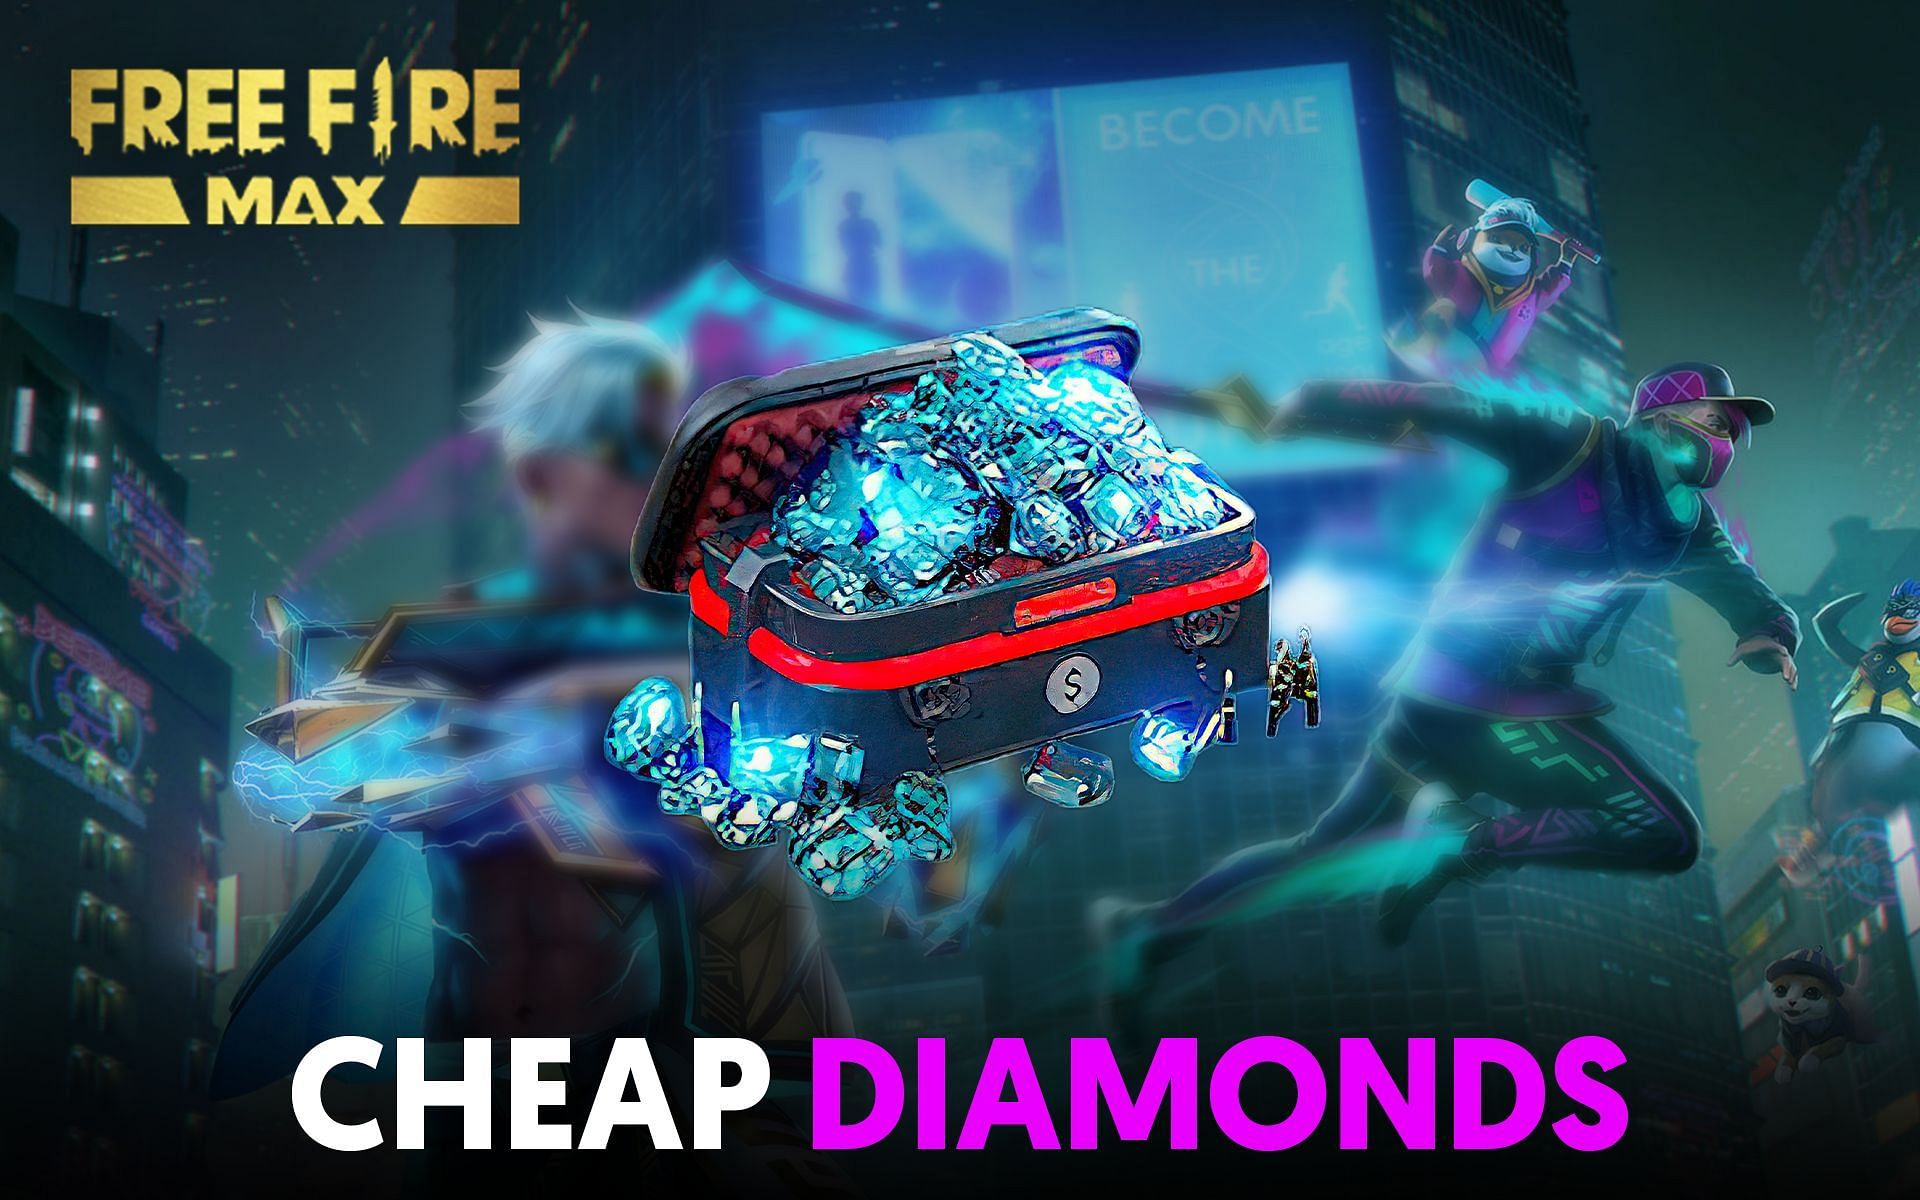 Ways to get cheap diamonds and skins in Free Fire MAX (Image via Sportskeeda)